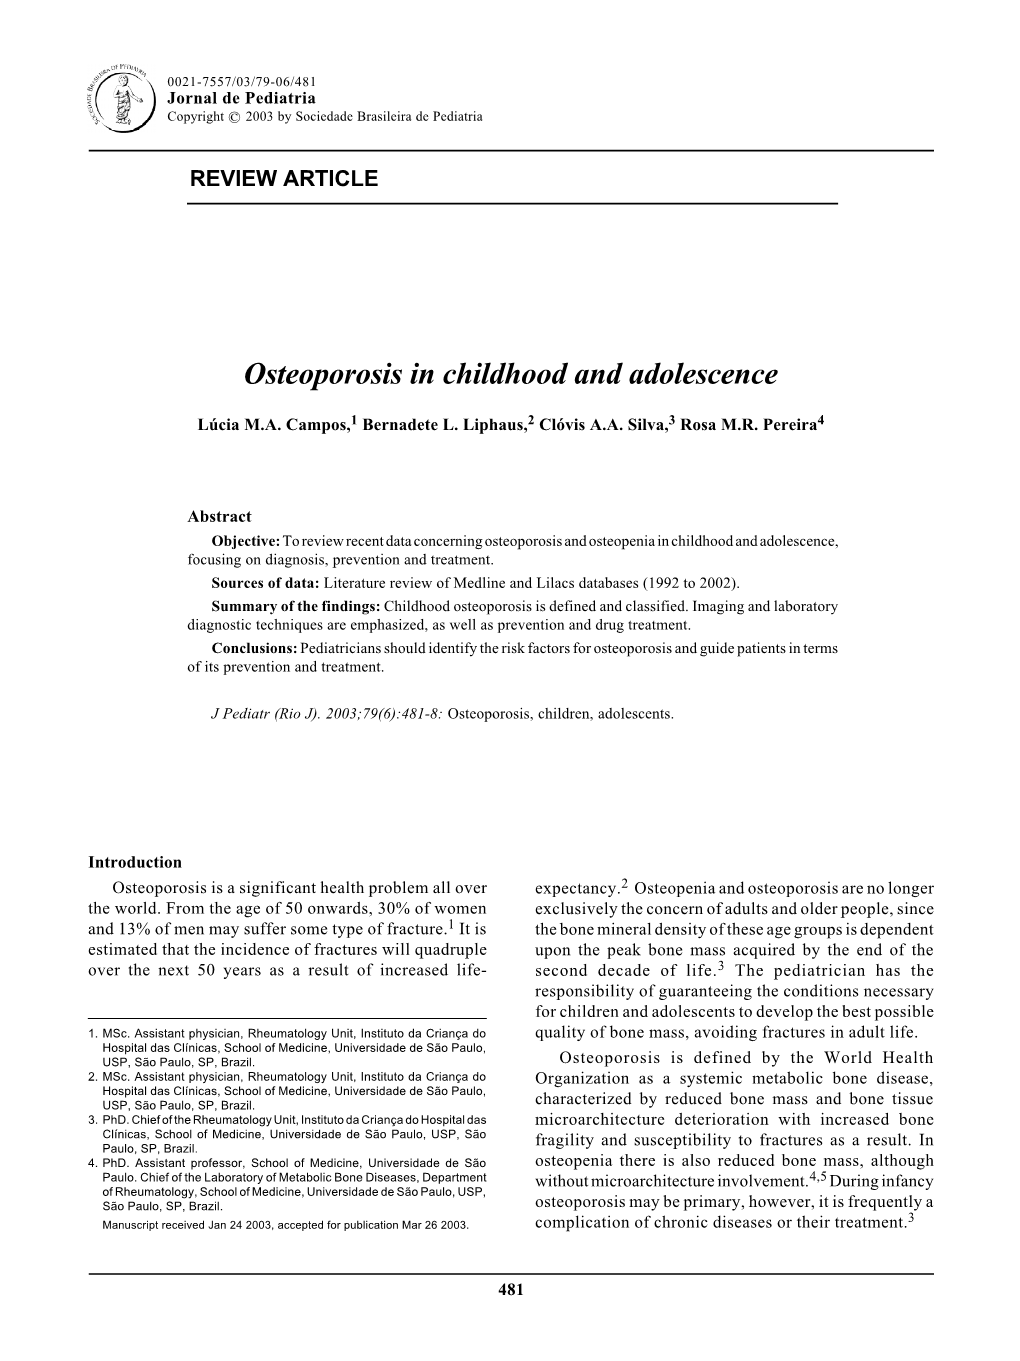 Osteoporosis in Childhood and Adolescence